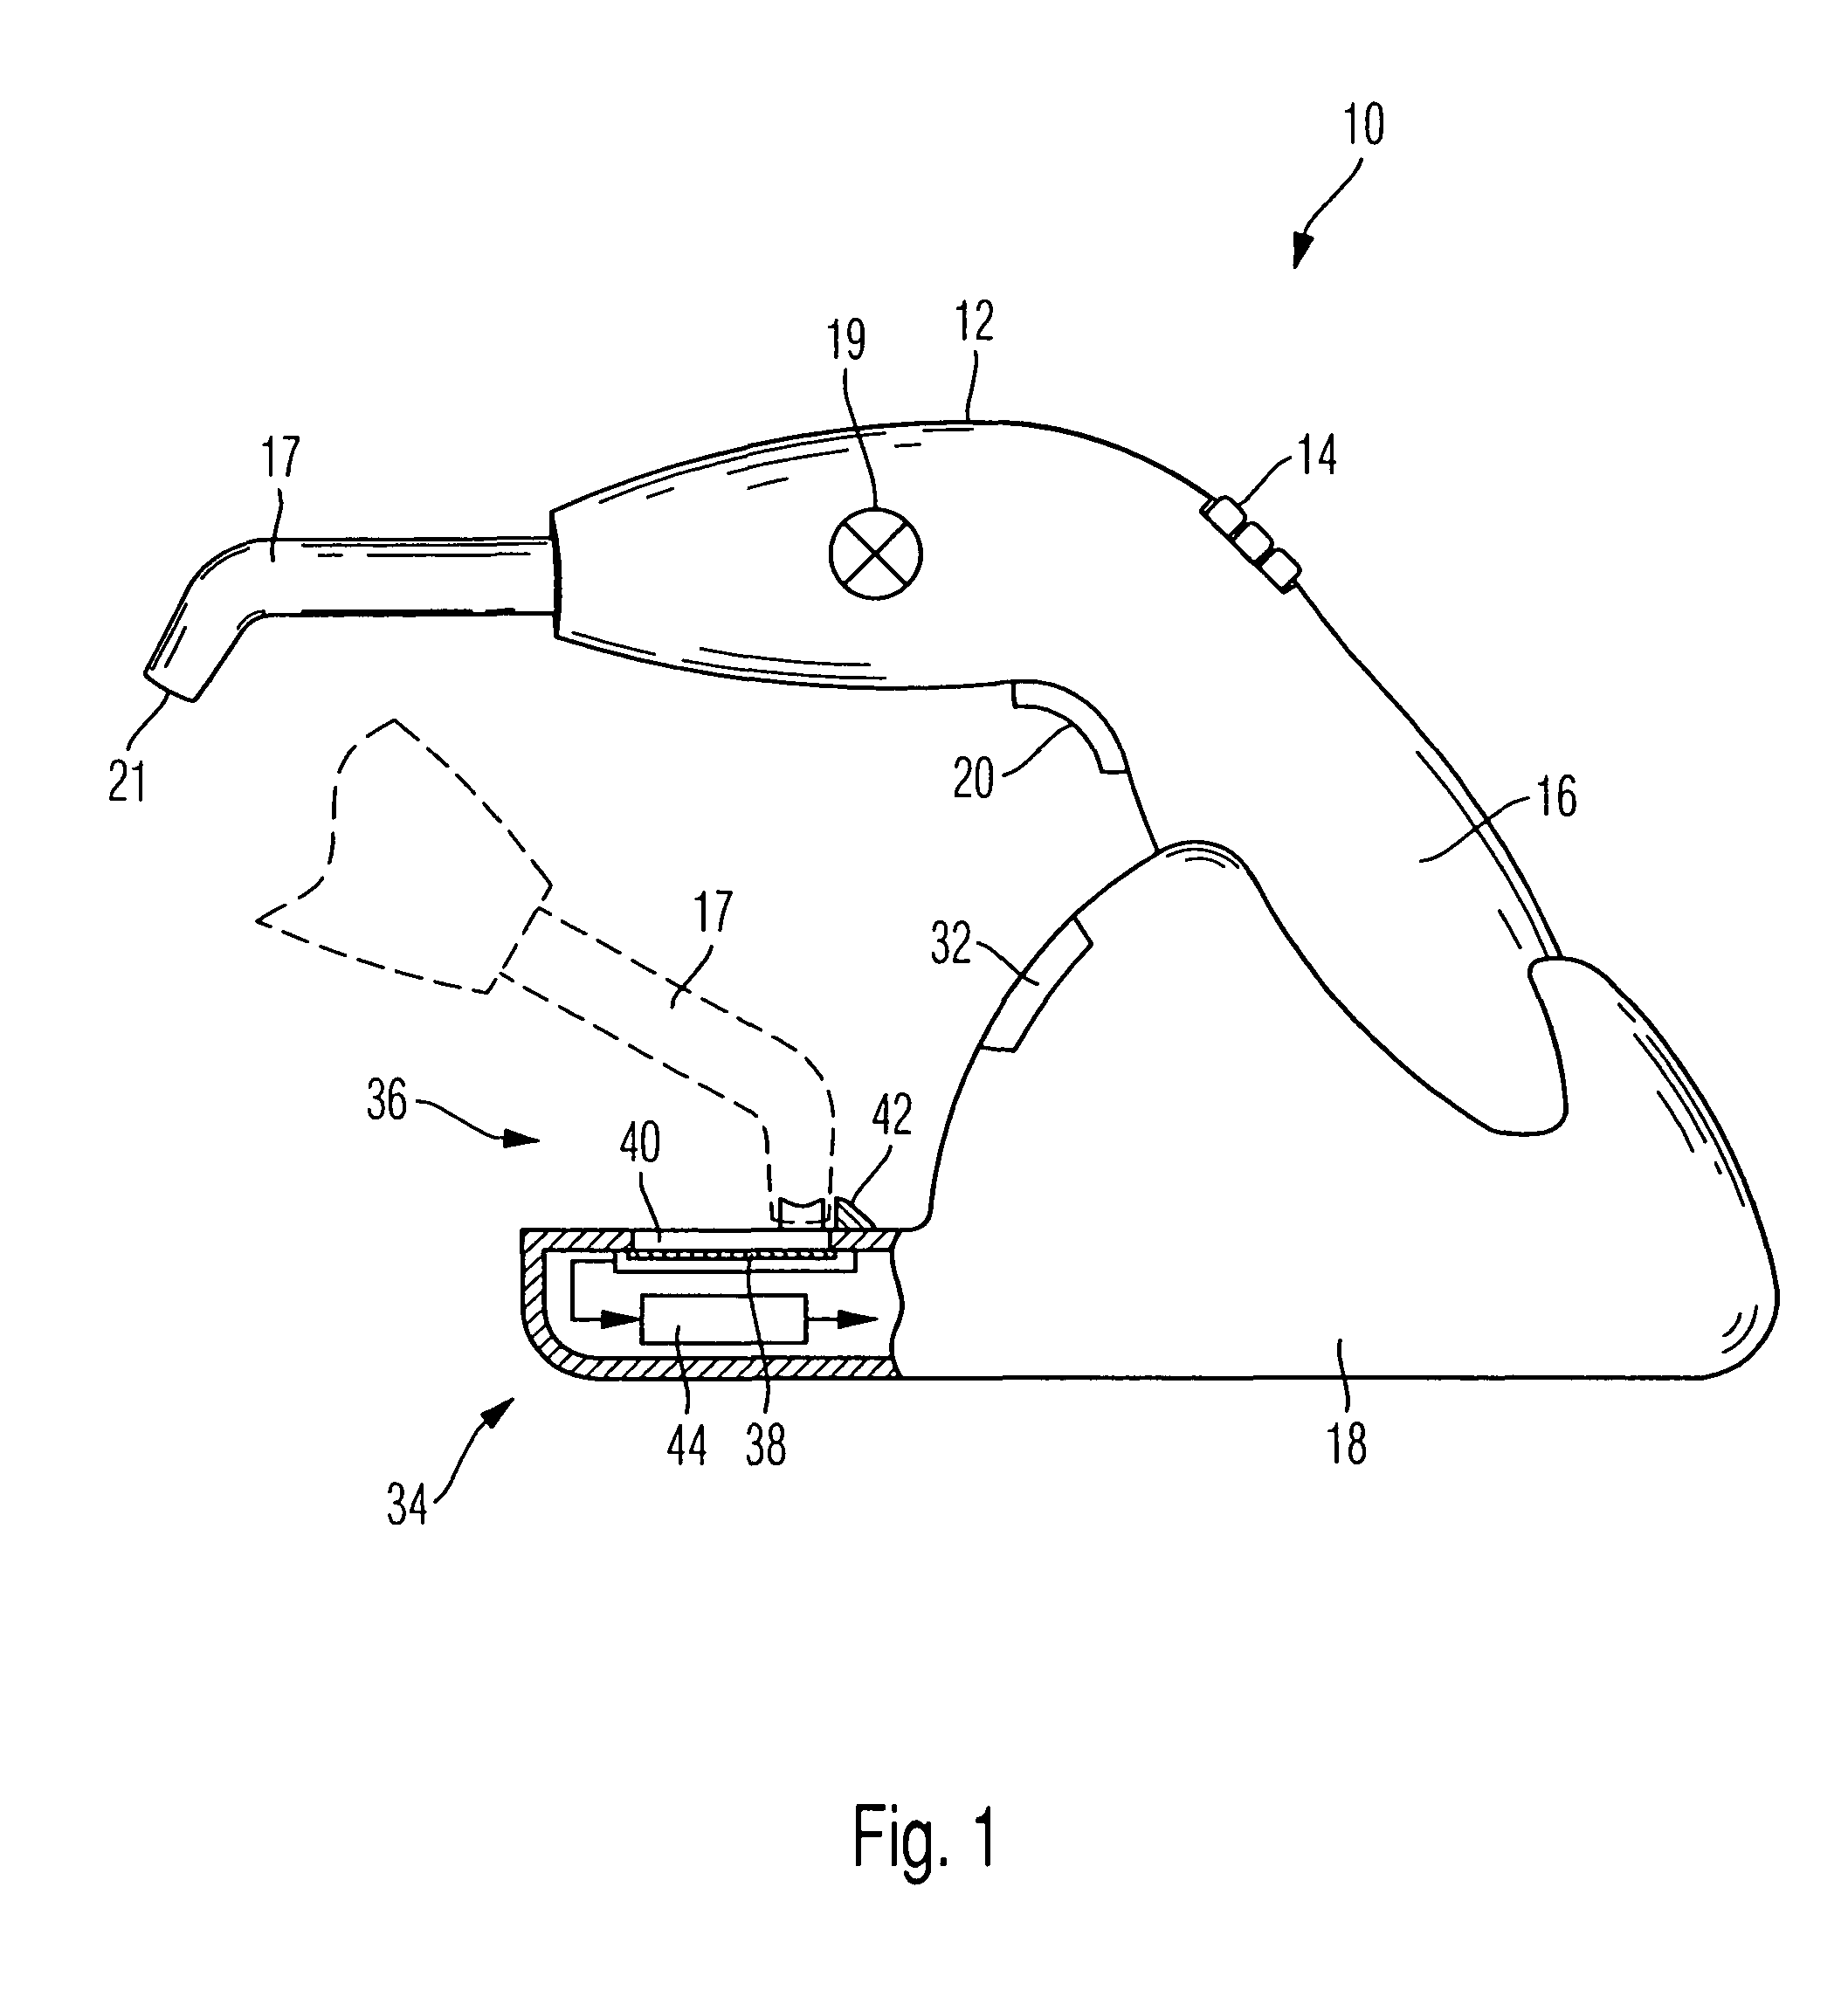 Dental light curing device coupled to a light measuring device